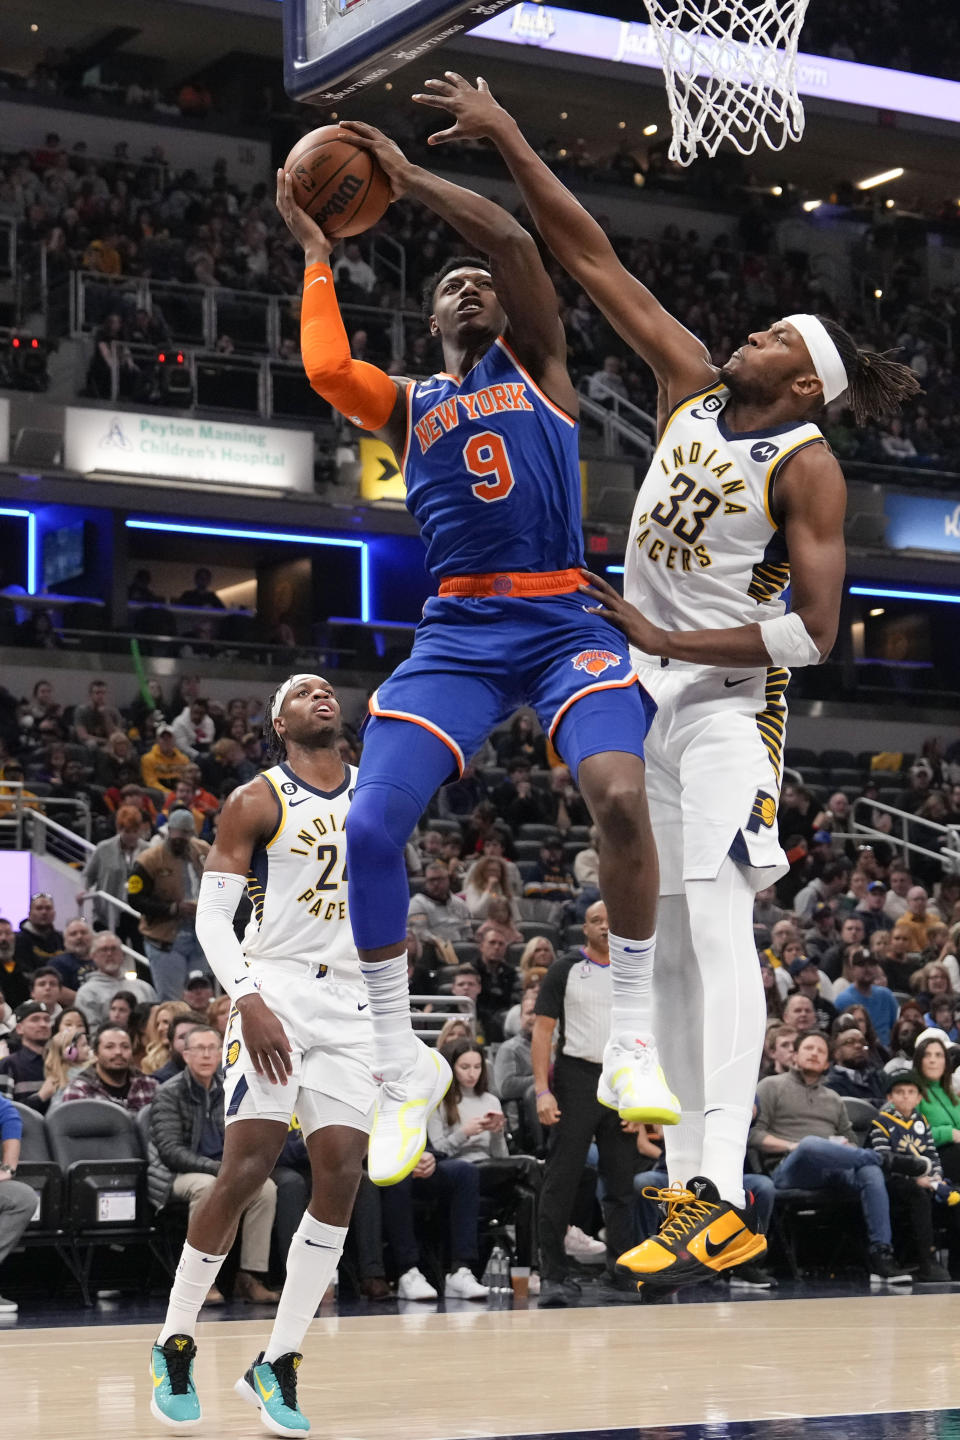 New York Knicks guard RJ Barrett (9) shoots around Indiana Pacers center Myles Turner (33) during the first half of an NBA basketball game in Indianapolis, Sunday, Dec. 18, 2022. (AP Photo/AJ Mast)